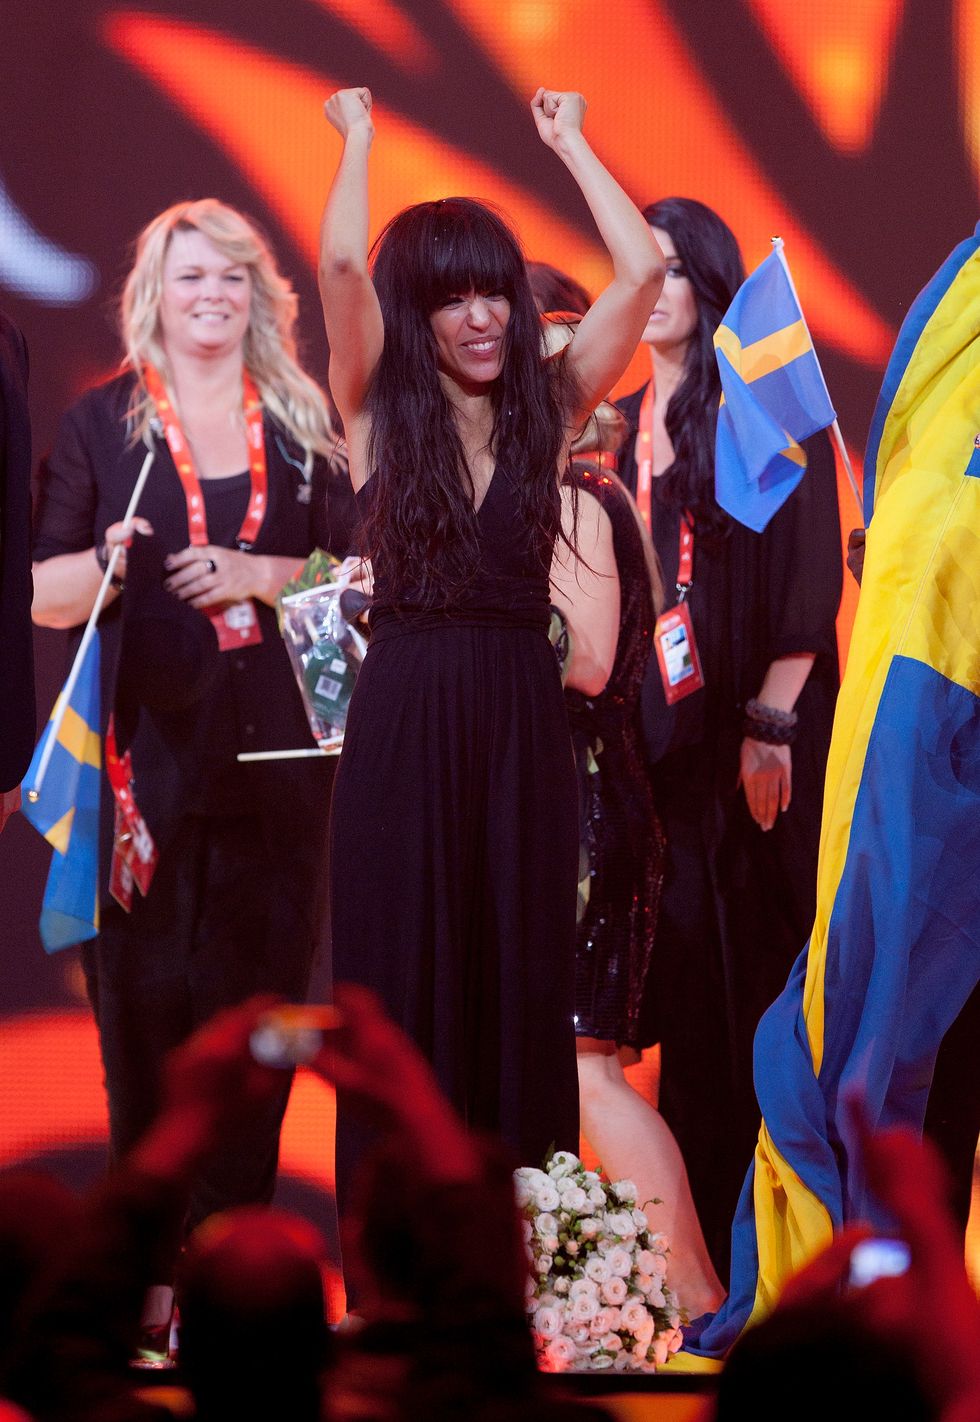 grand final eurovision song contest 2012